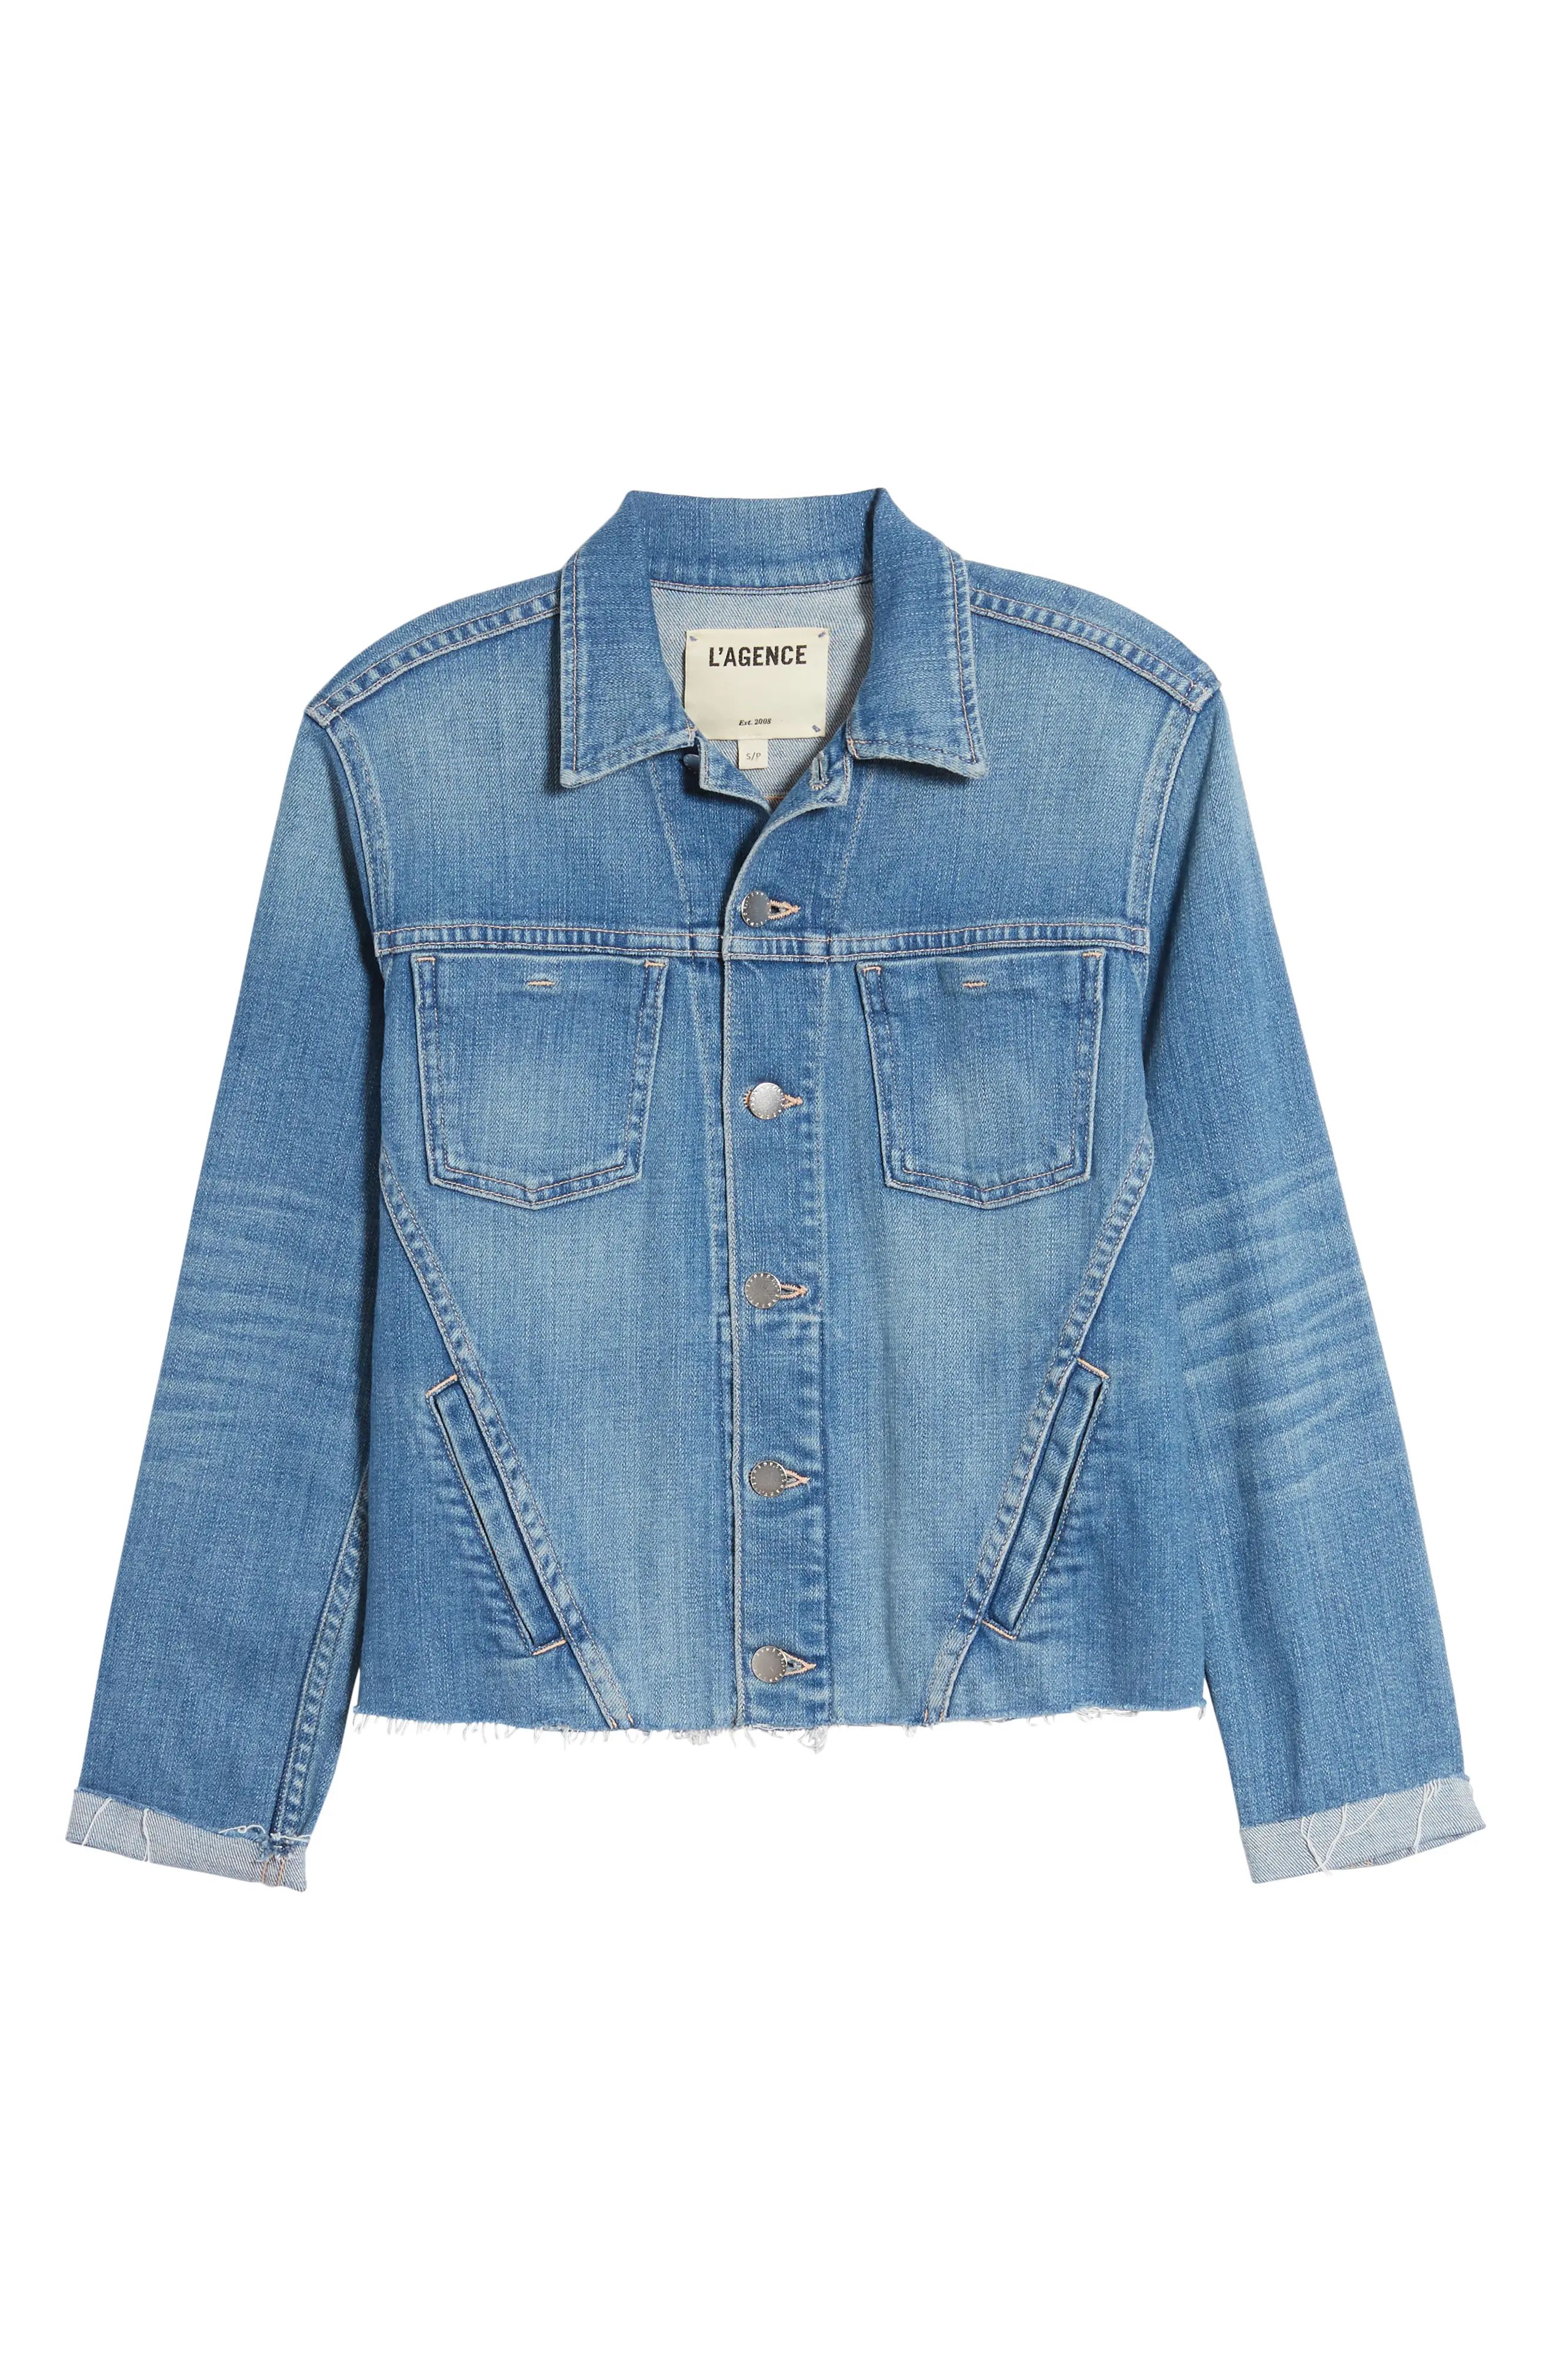 L'AGENCE Janelle Raw Cut Slim Denim Jacket in Pomona at Nordstrom, Size X-Small | Nordstrom